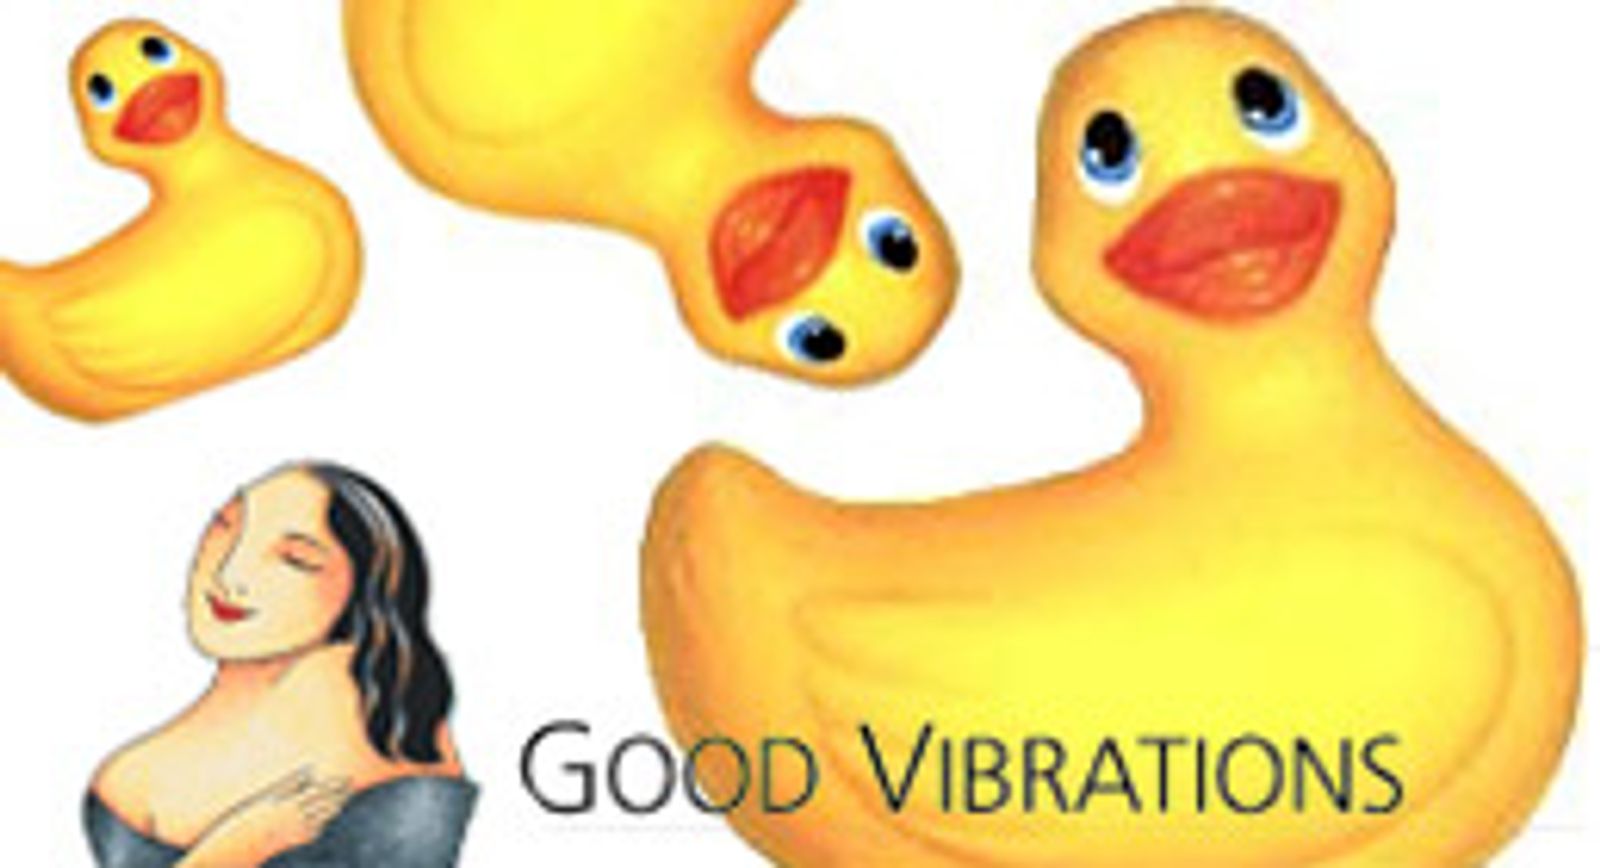 Good Vibrations Displays Ads in San Francisco Bus Shelters